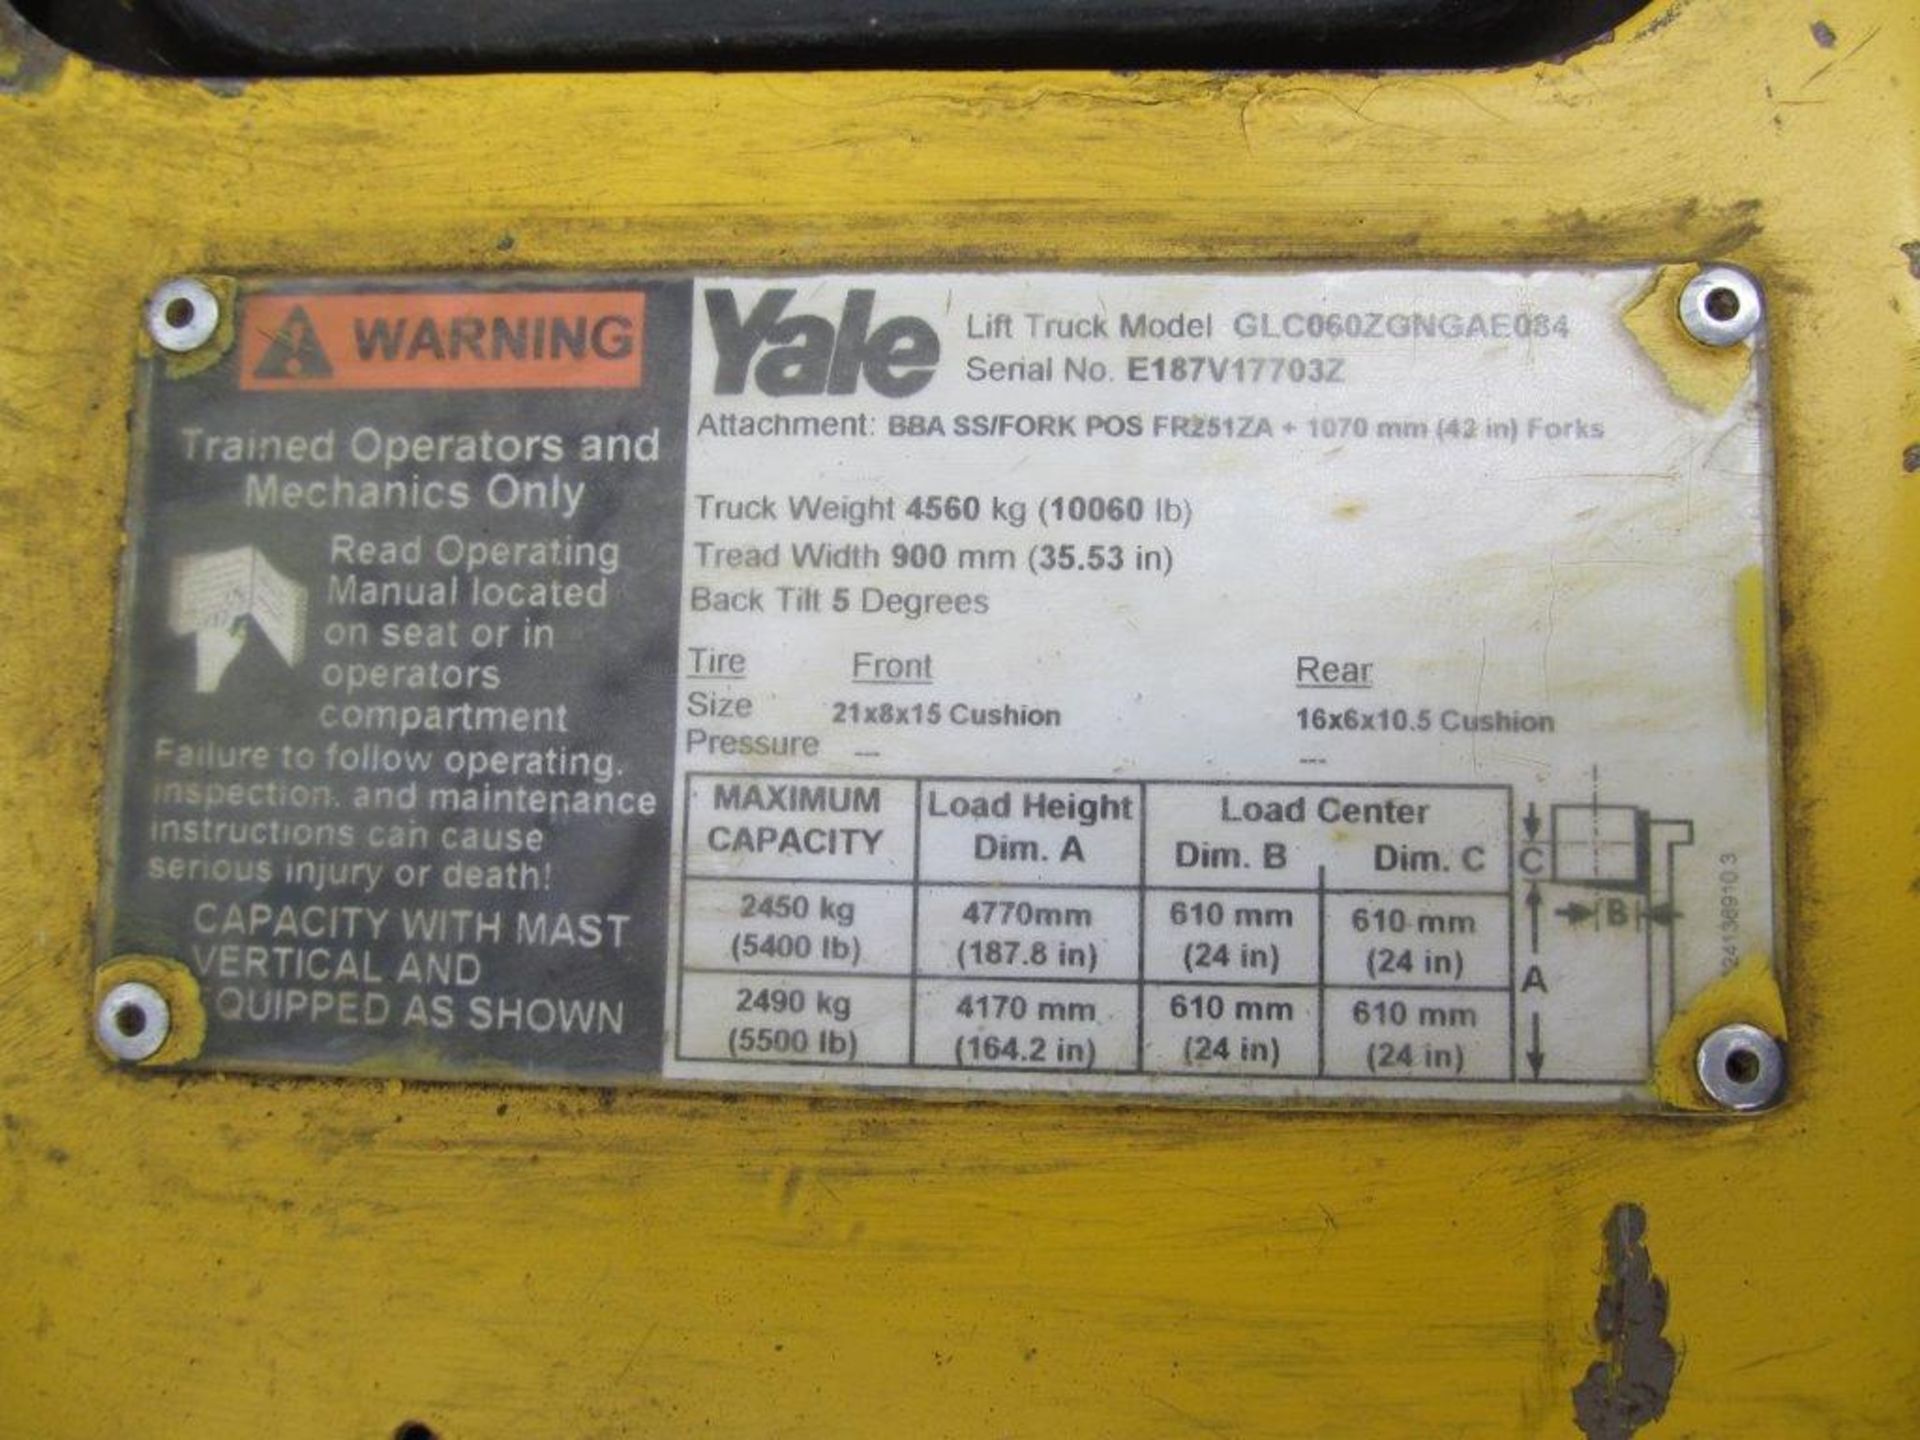 YALE PROPANE FORKLIFT MODEL: E466087, 5000 LBS CAP, INDOOR/OUTDOOR, "PROPANE TANK NOT INCLUDED" - Image 9 of 10